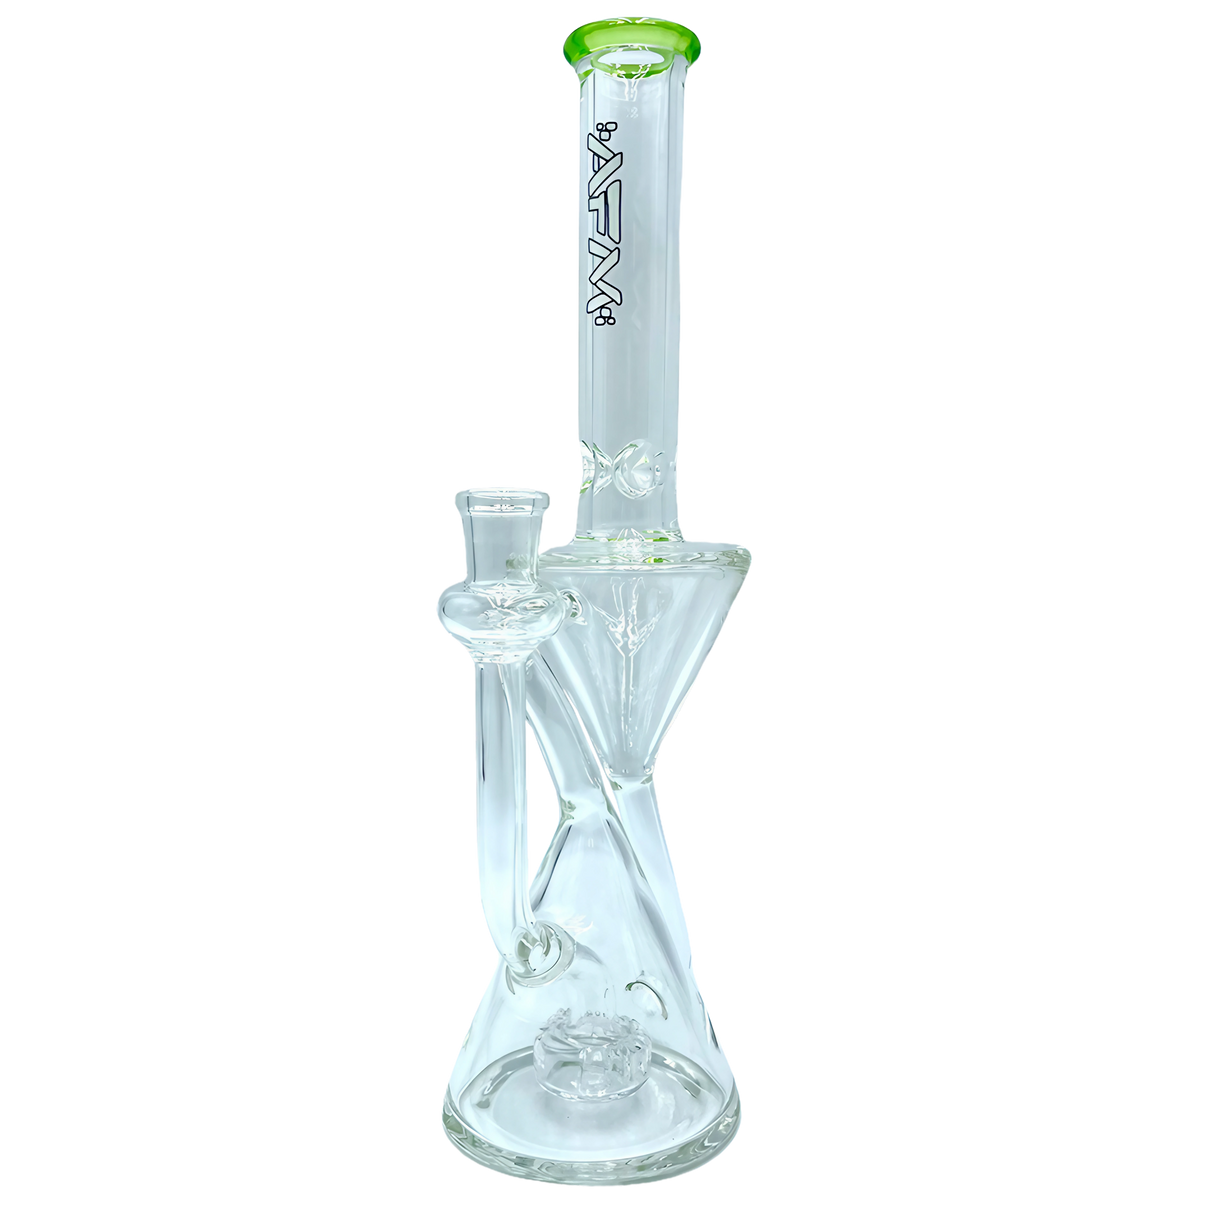 AFM The Time Recycler Rig - 12" with Showerhead Percolator and Lime Accents - Front View